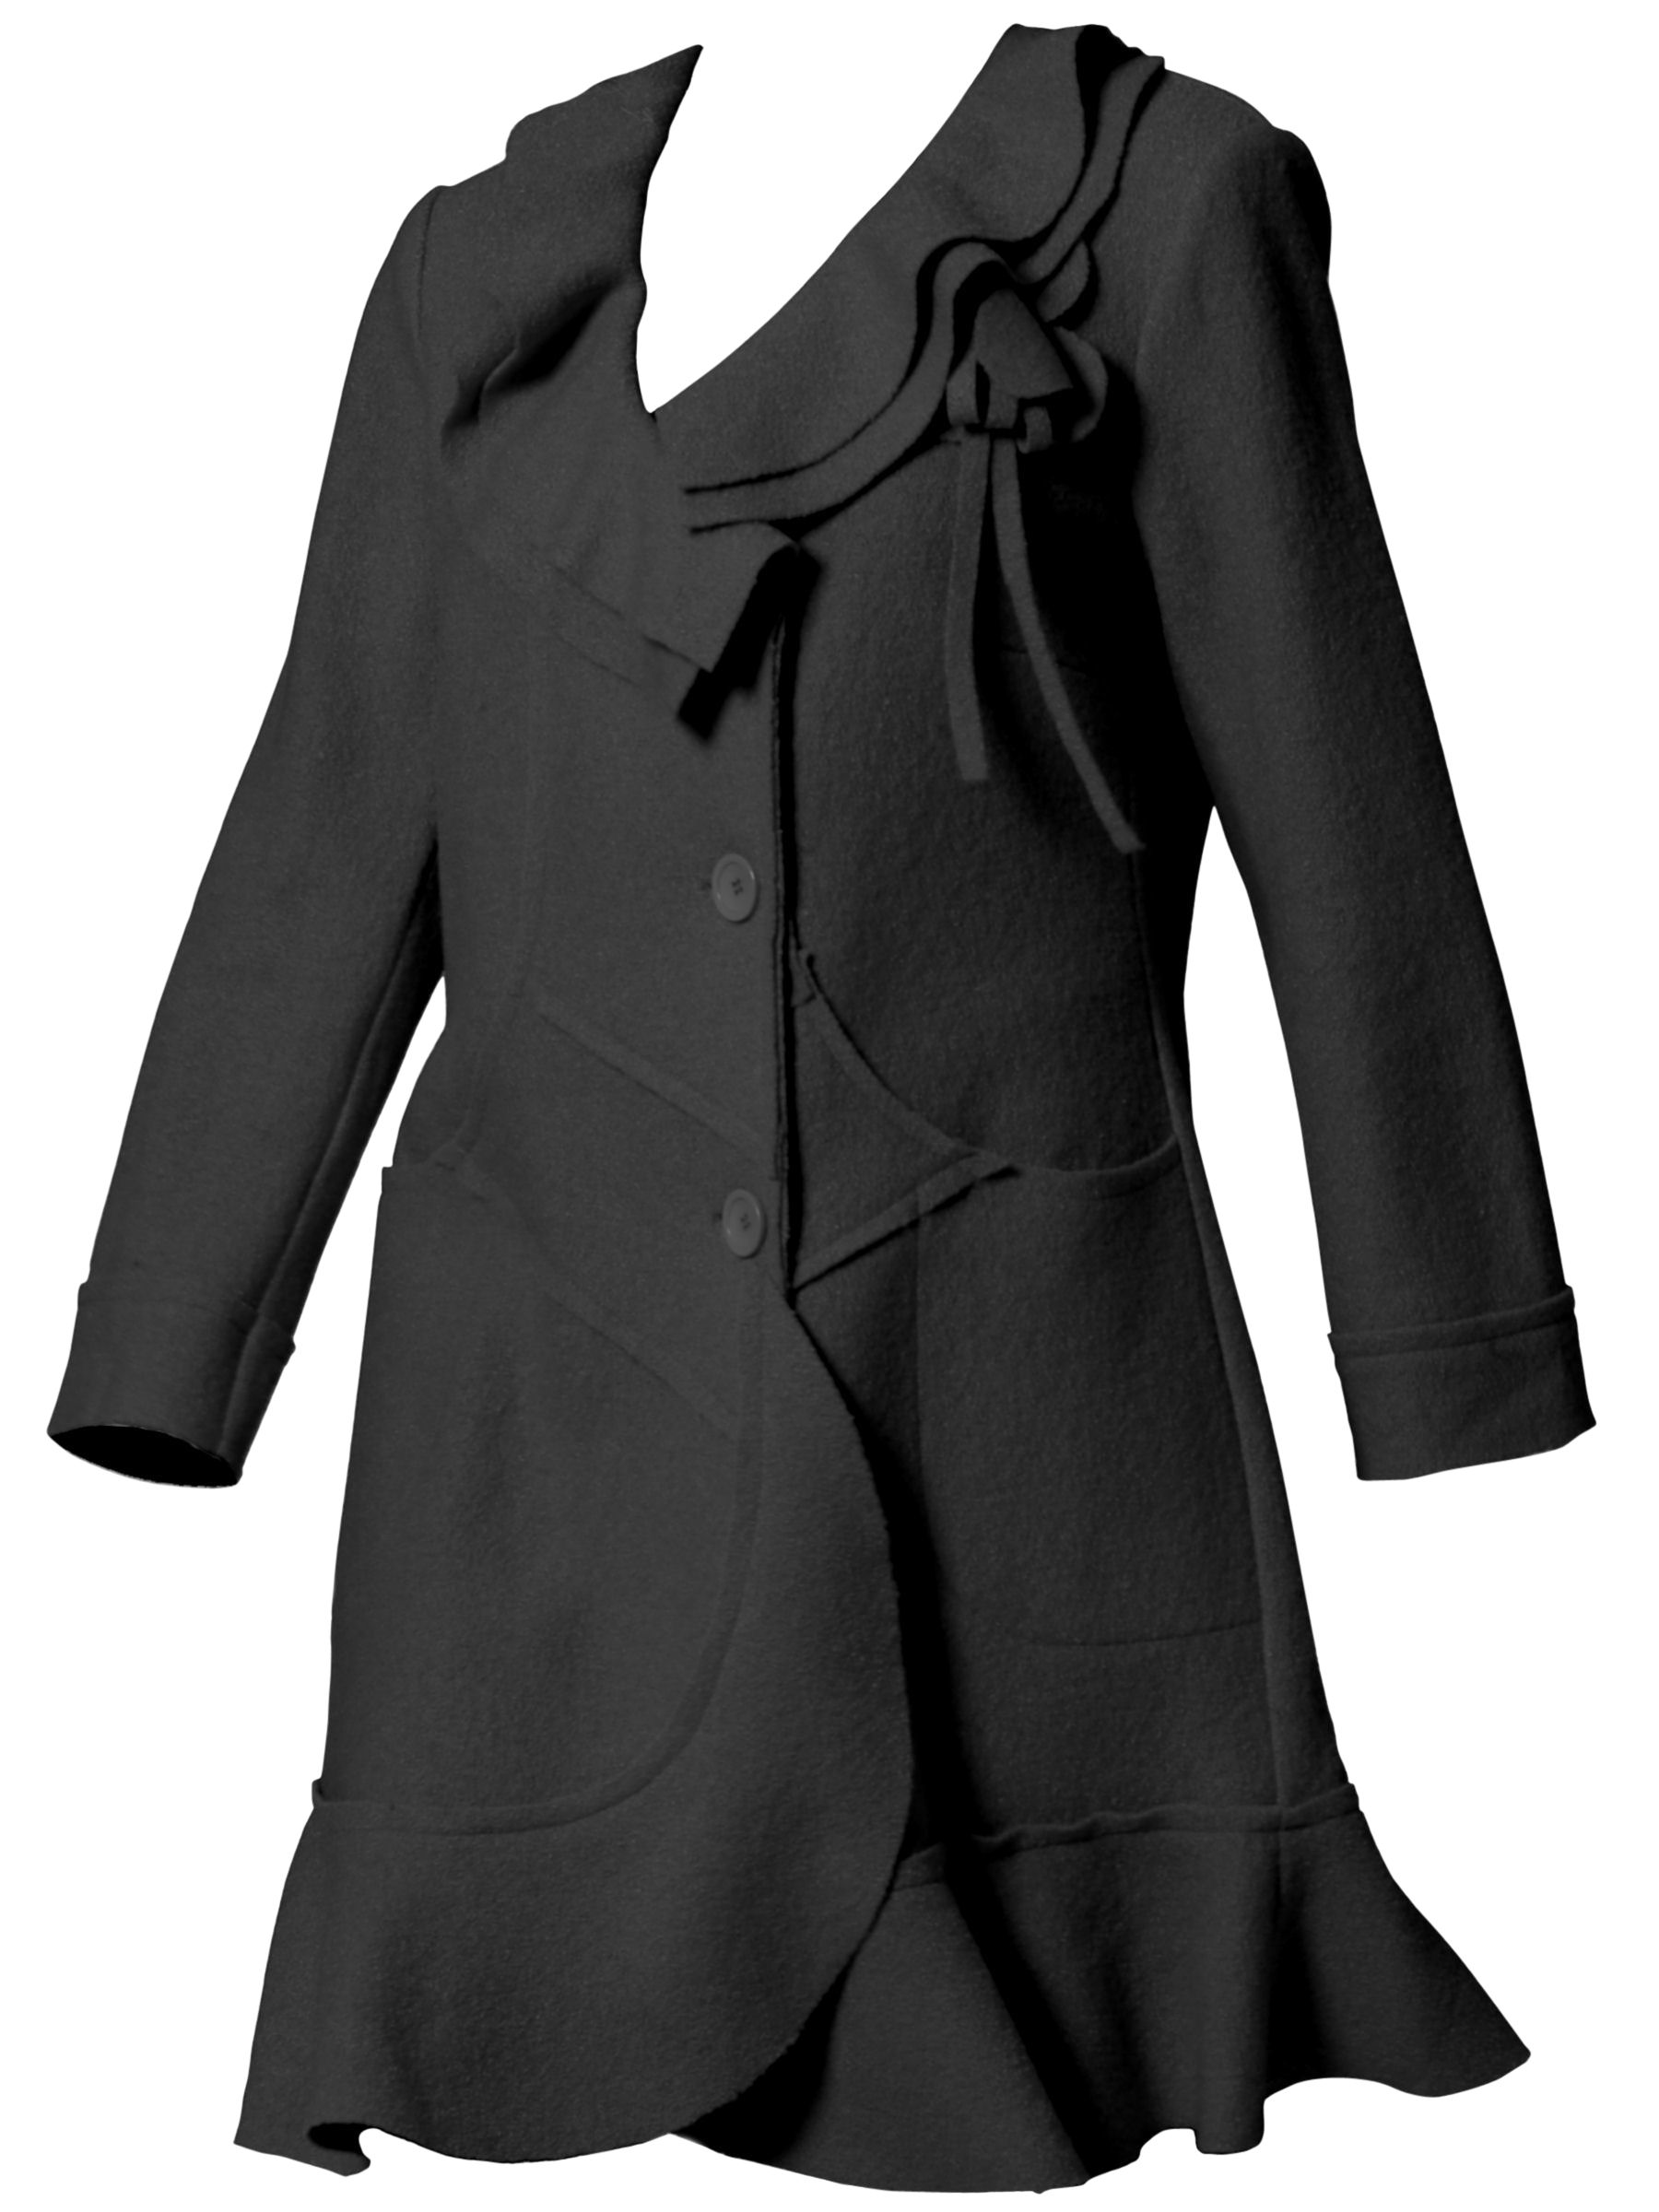 Chesca Double Collar Boiled Wool Mix Coat, Black at John Lewis